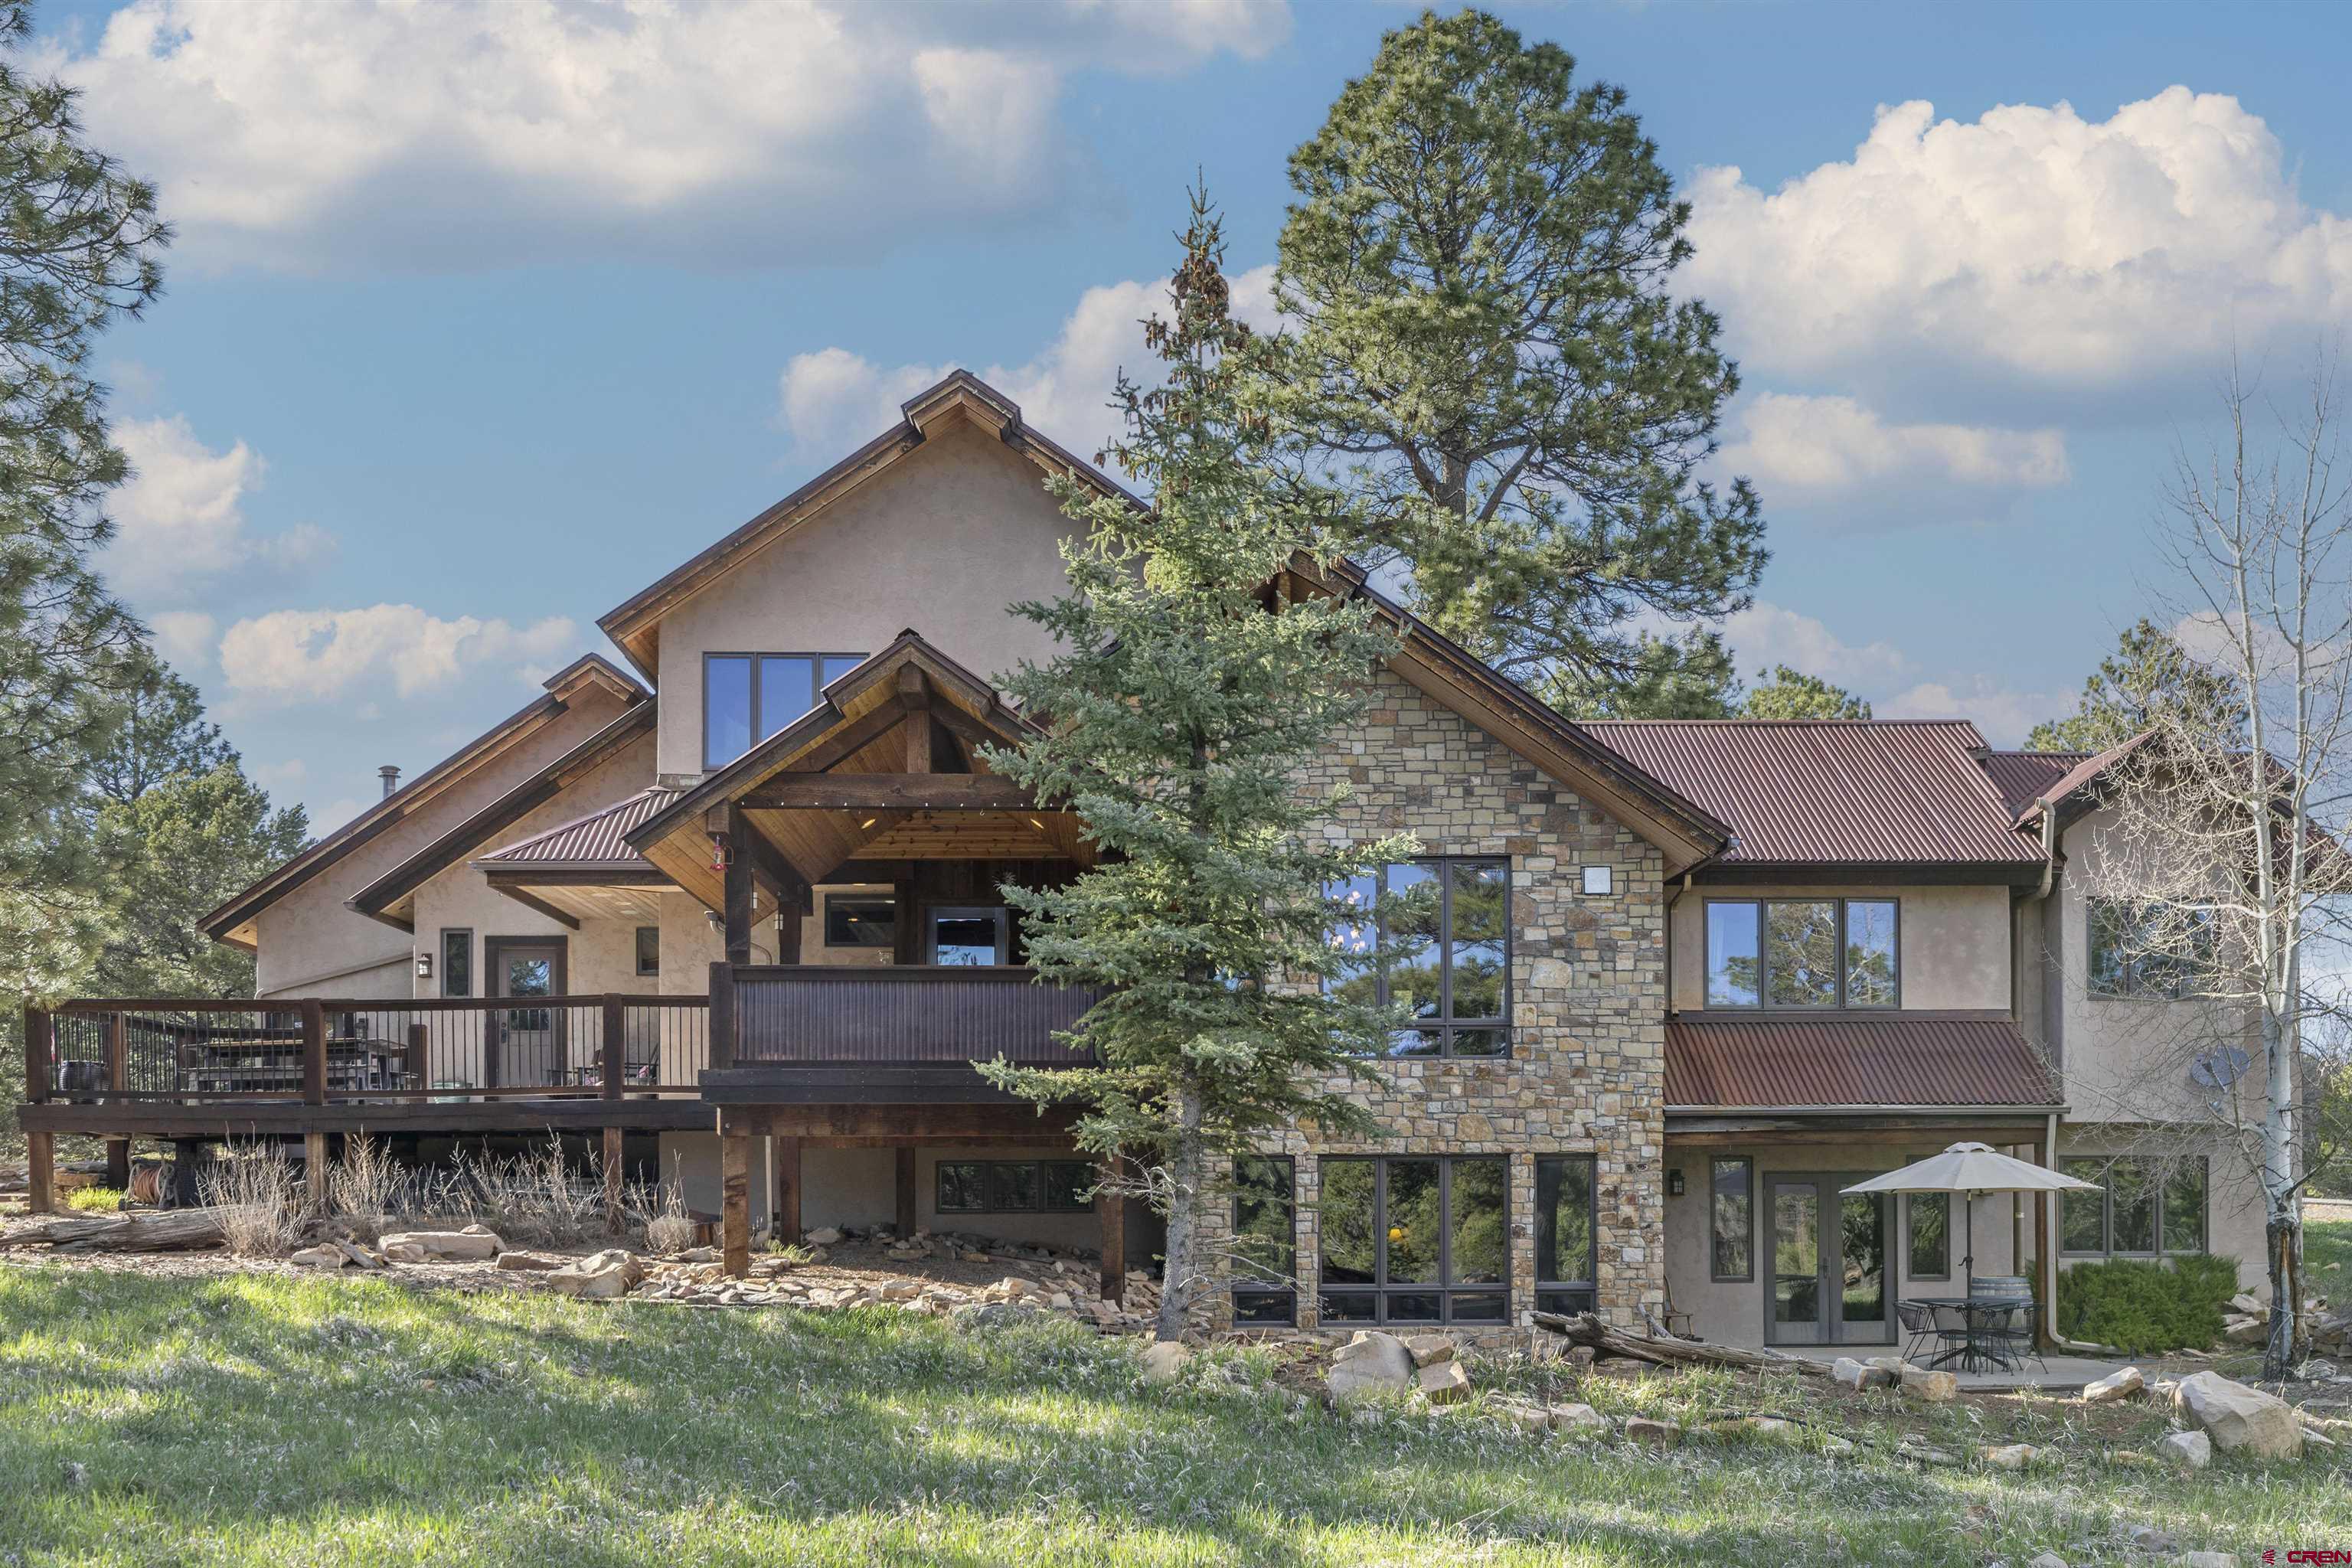 This Divide Ranch and Club home is located on the 11th tee box. This home is ready for someone looking for that perfect mountain retreat. The trees are aspen and ponderosa pine, allowing for incredible privacy. The views are of the golf course and the mountain peaks of the Cimarron, San Juan and Sneffels Ranges. There is forested open space in the back yard that includes an extensive patio, a fire pit and a very comfortable covered deck. Travertine tile flooring on both levels with new oak flooring as well in the lower level. The upstairs has a great room with a large open kitchen, which flows into the living room. The covered deck is situated right outside the dining area and creates a comfortable outdoor living area. The primary bedroom on the main level has a large walk in closet with a great master bath. Two bedrooms and a flex room are located on the lower level along with a large family room and a full sized bath. The exterior is stucco and stone. The interior has been professionally painted in 2022.